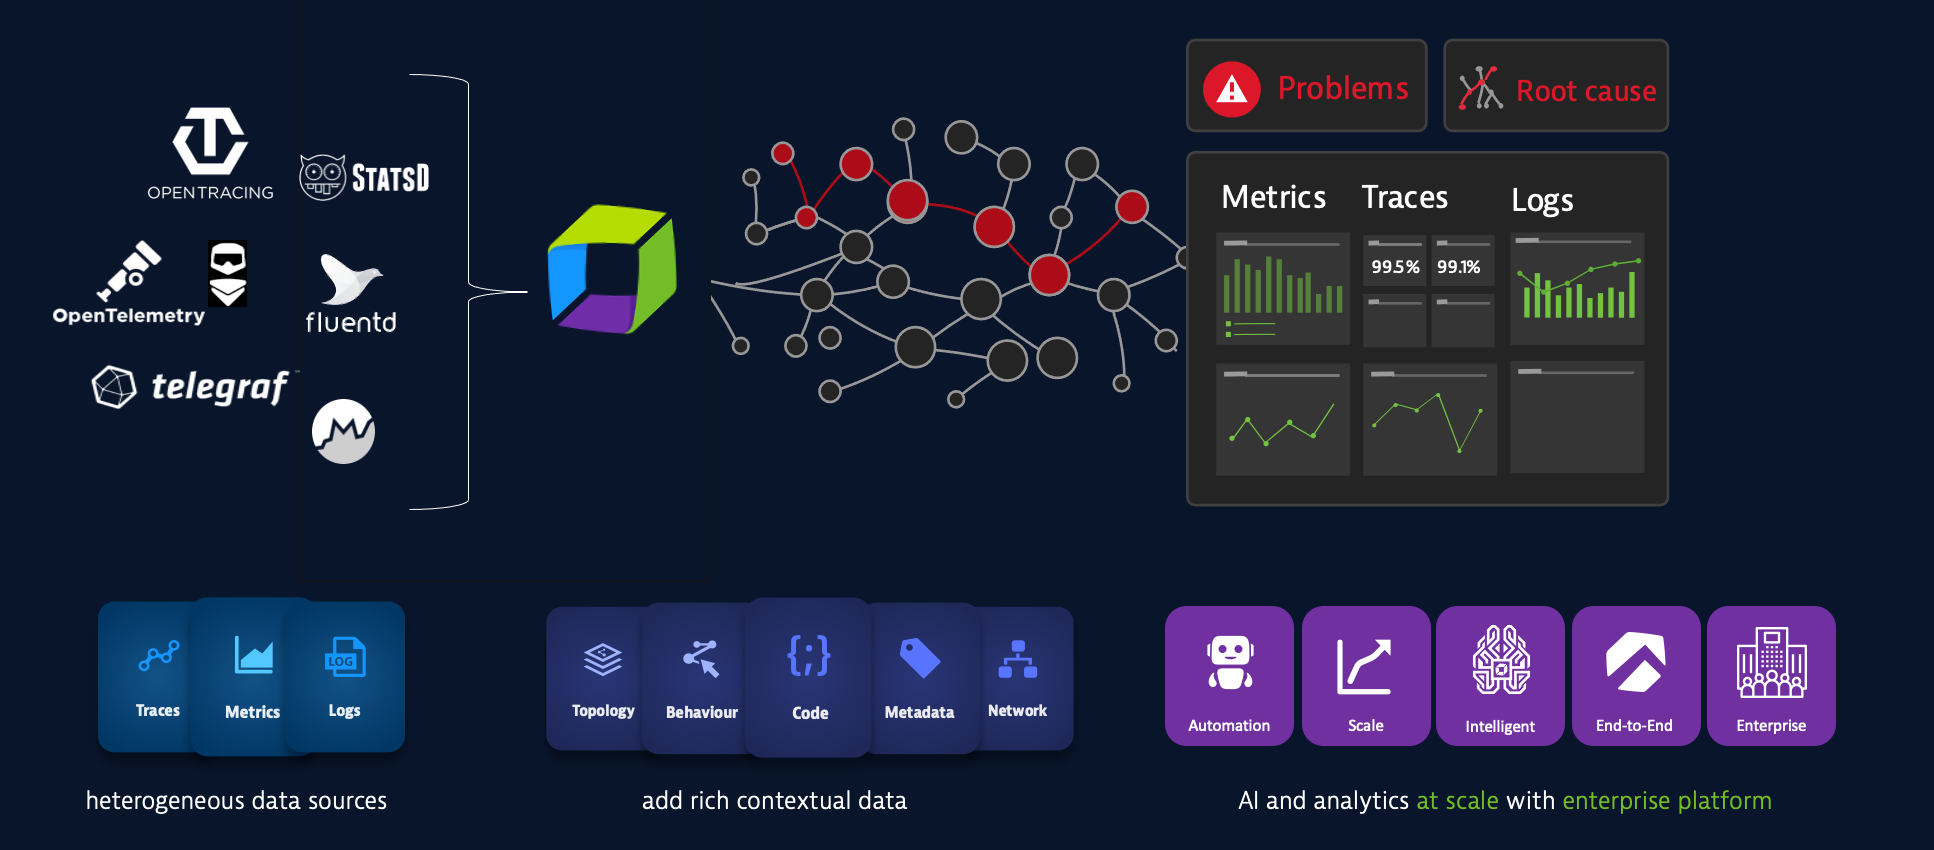 How Dynatrace enriches metrics, traces, and logs to identify problems with precise root cause analysis